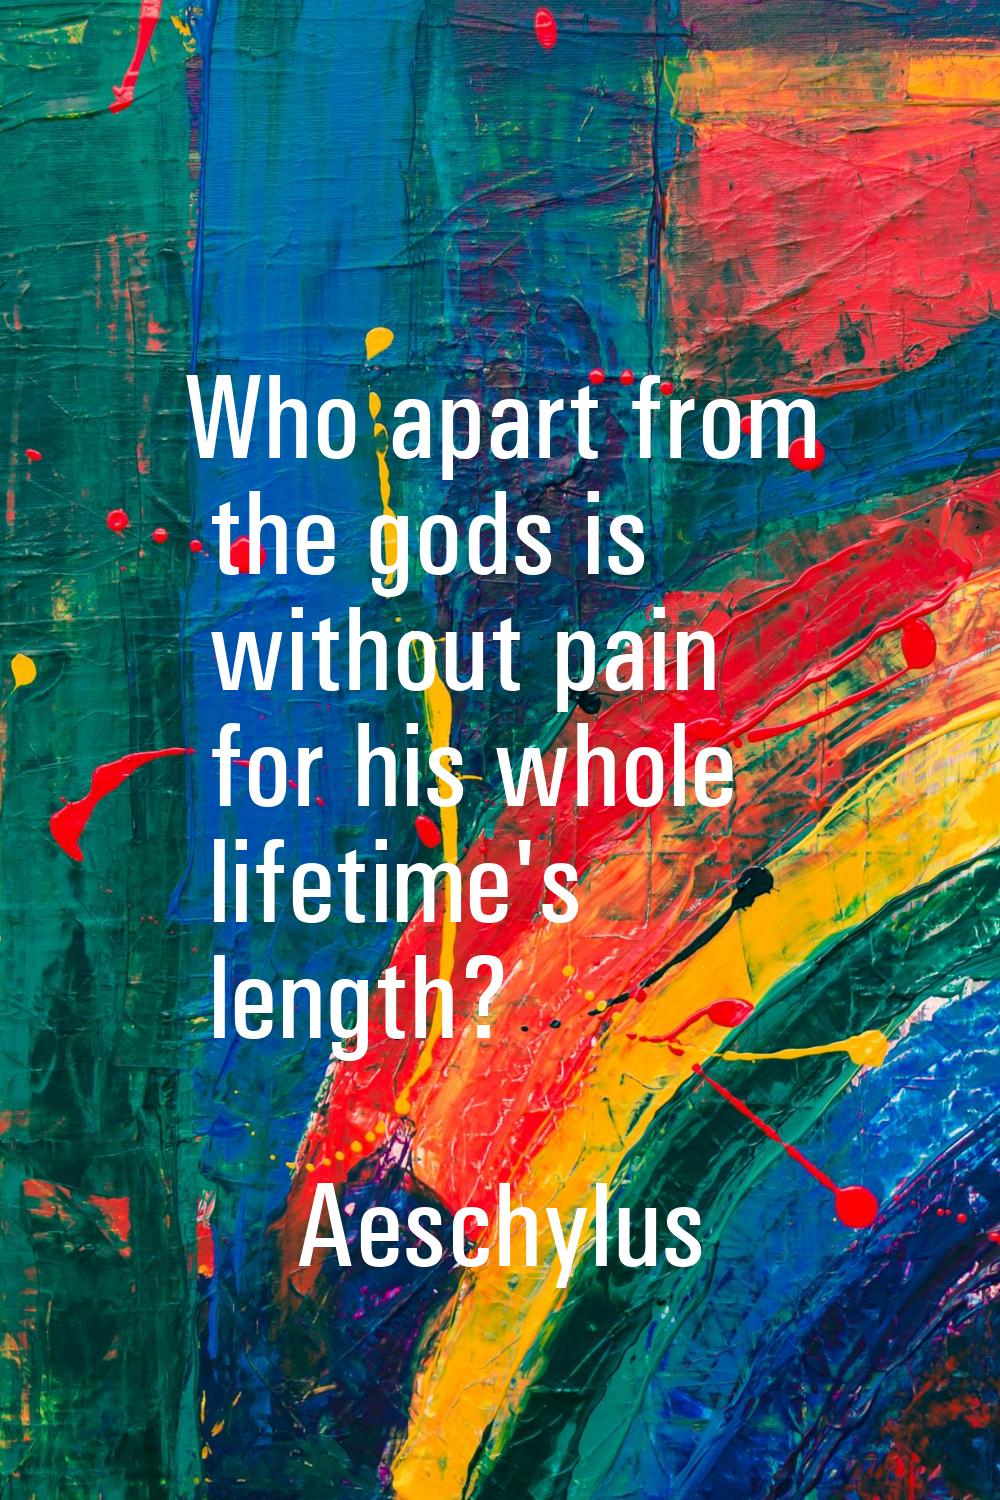 Who apart from the gods is without pain for his whole lifetime's length?